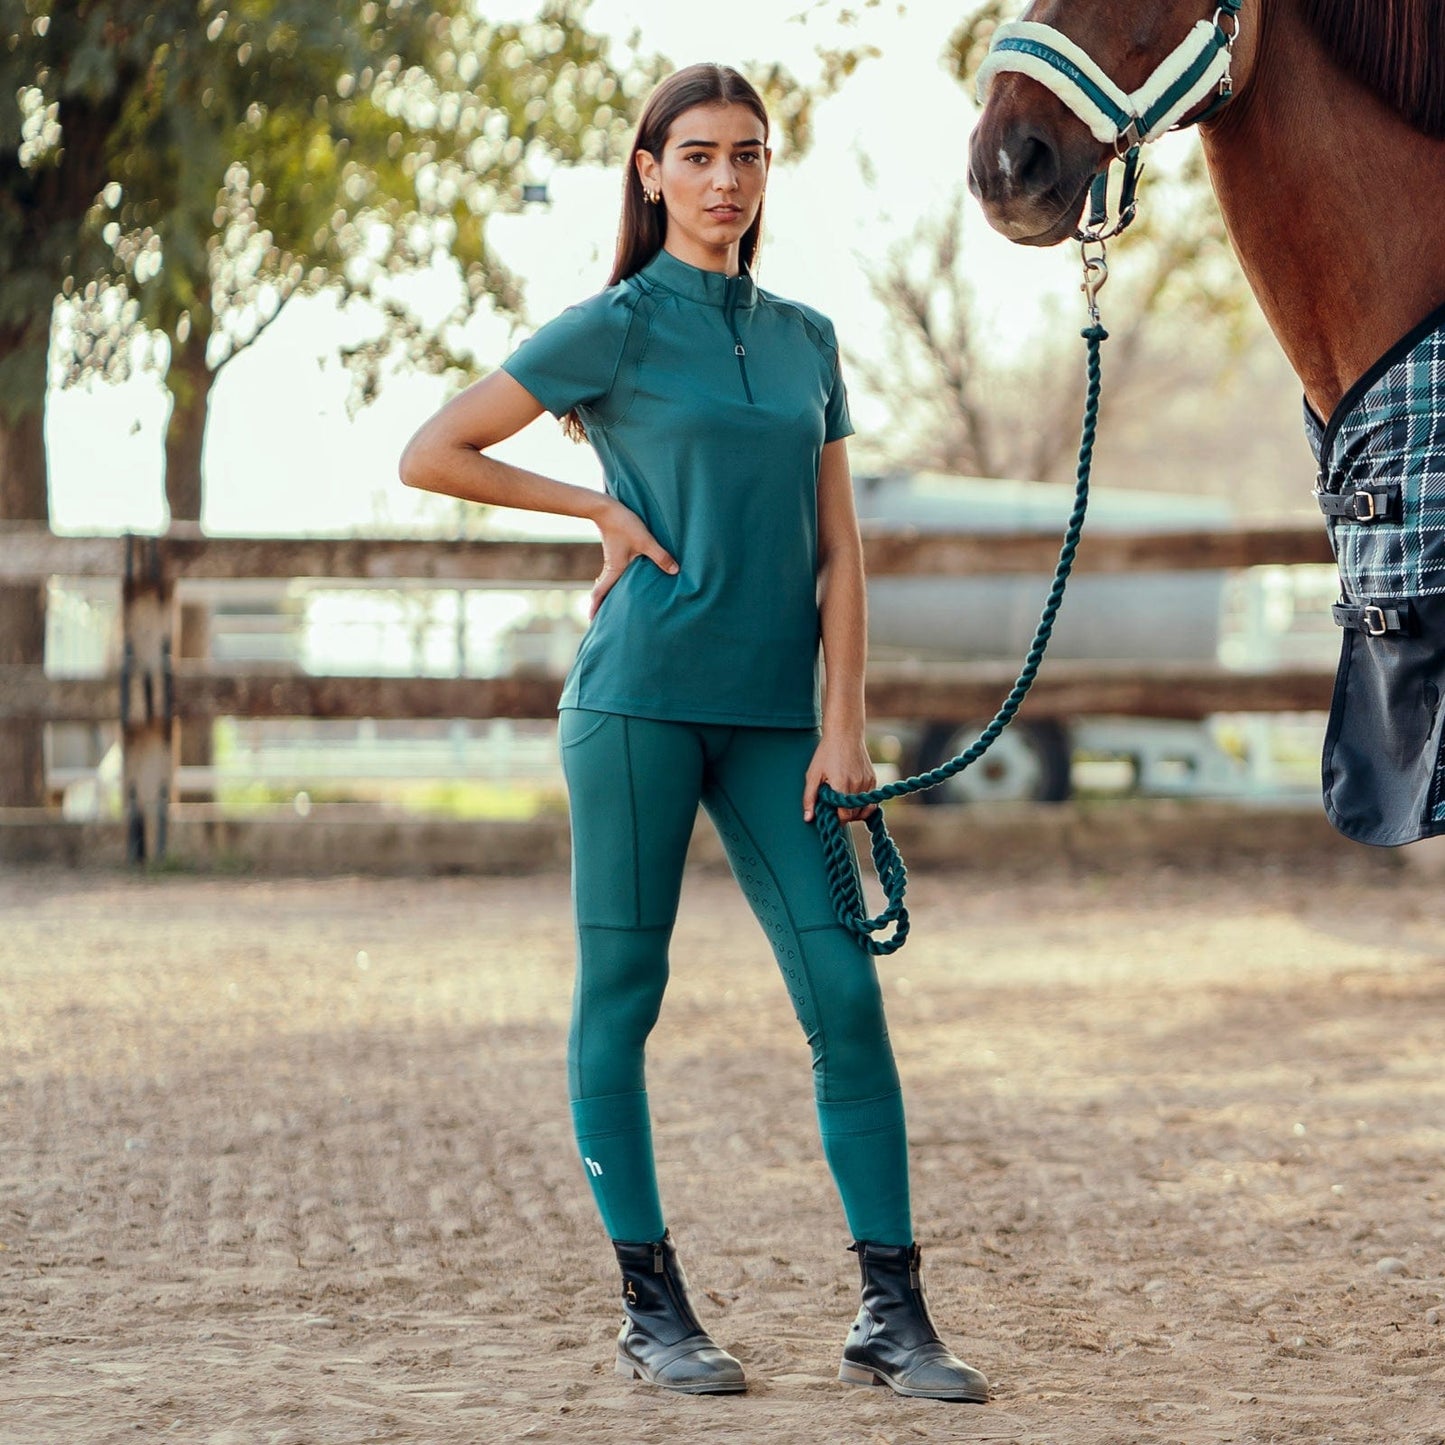 Horze Shirt Storm Green / XS-4 Horze- Mia Training Polo SS equestrian team apparel online tack store mobile tack store custom farm apparel custom show stable clothing equestrian lifestyle horse show clothing riding clothes horses equestrian tack store